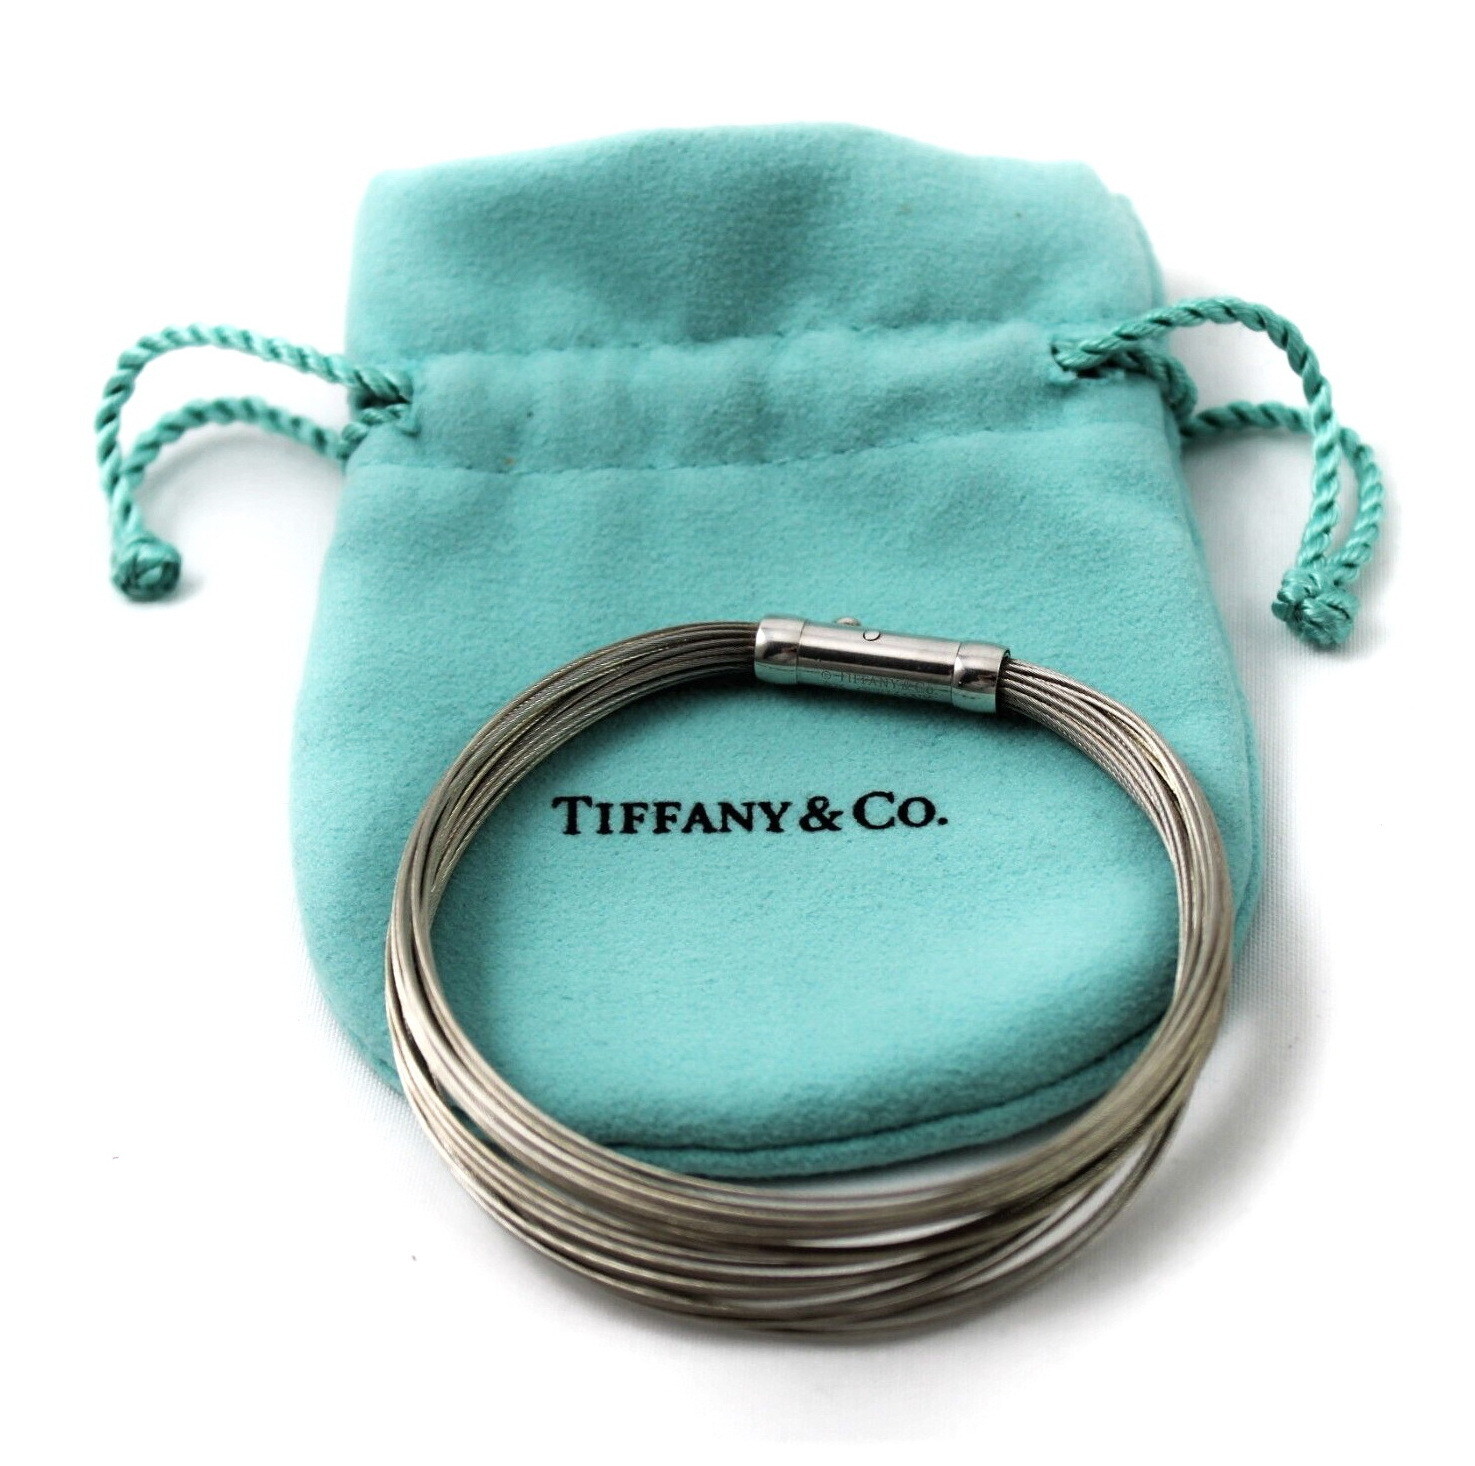 Tiffany & Co Mother's Day Gift for Wife